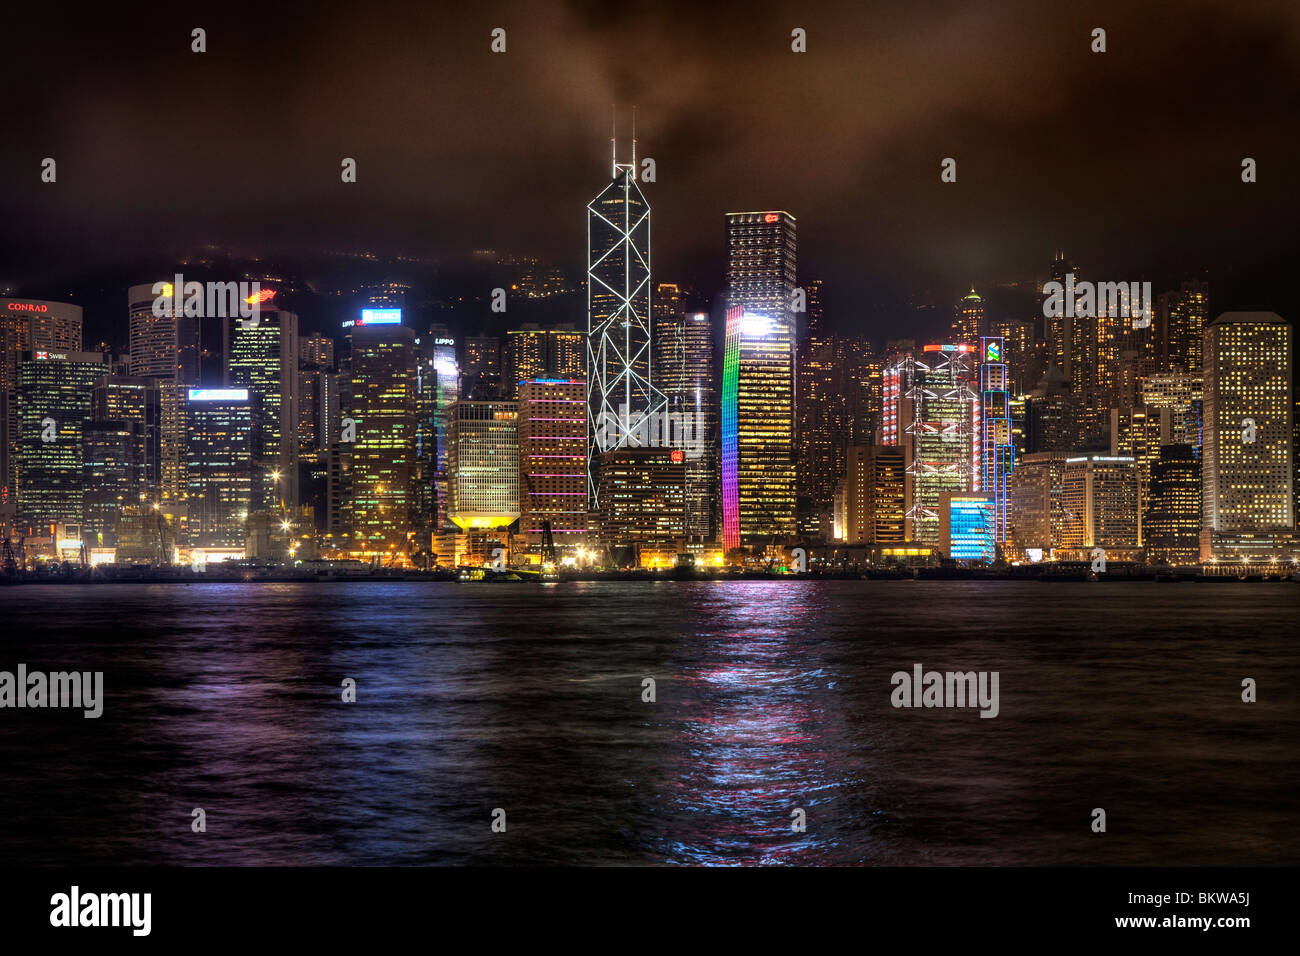 Tall buildings on Hong Kong Island city centre as seen across the harbour from Tsim Sha Tsui on Kowloon side at night Stock Photo